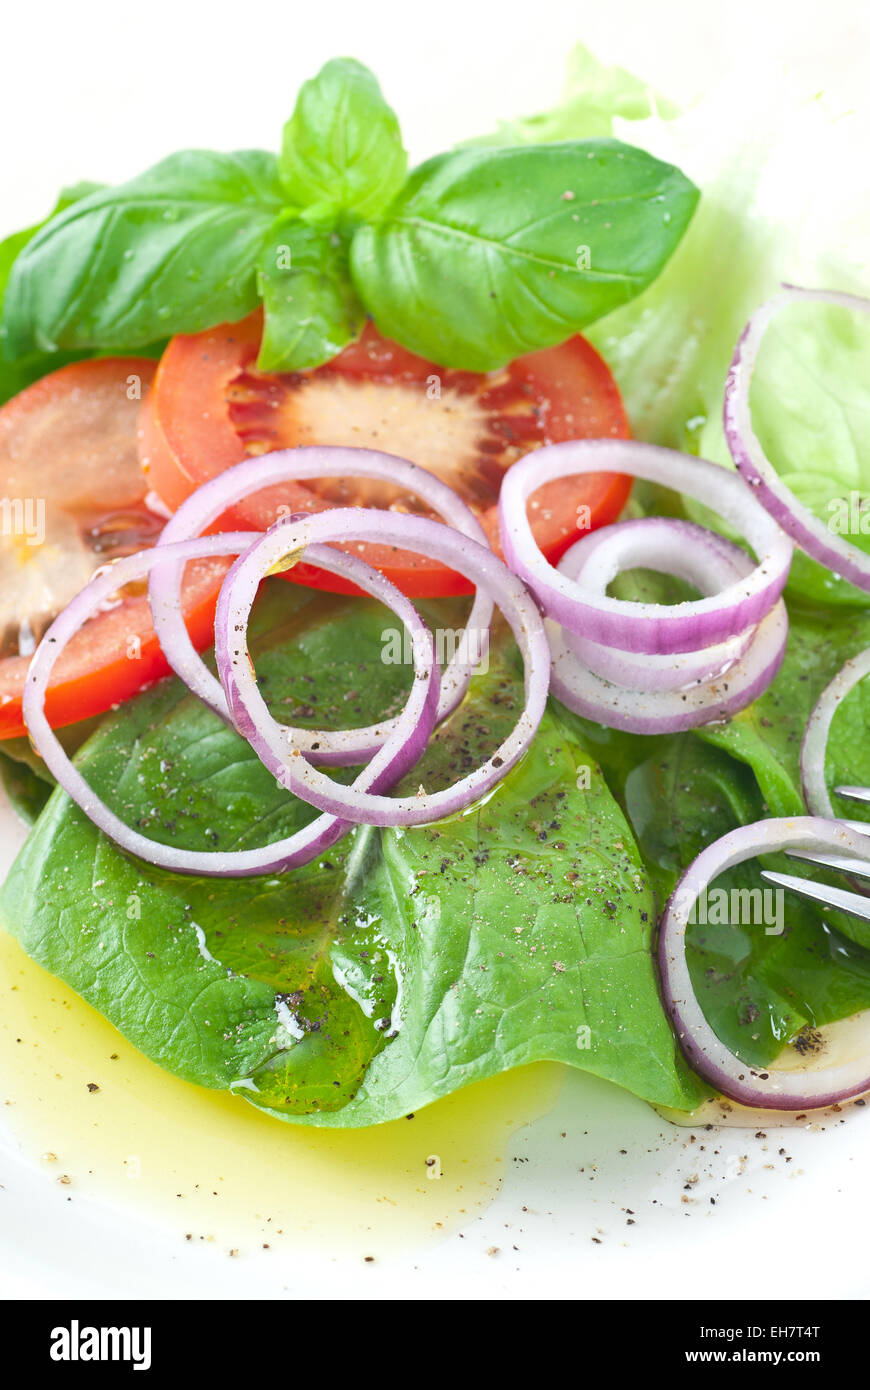 Lettuce with spanish onion and red tomato. Served with olive oil and black pepper. Stock Photo